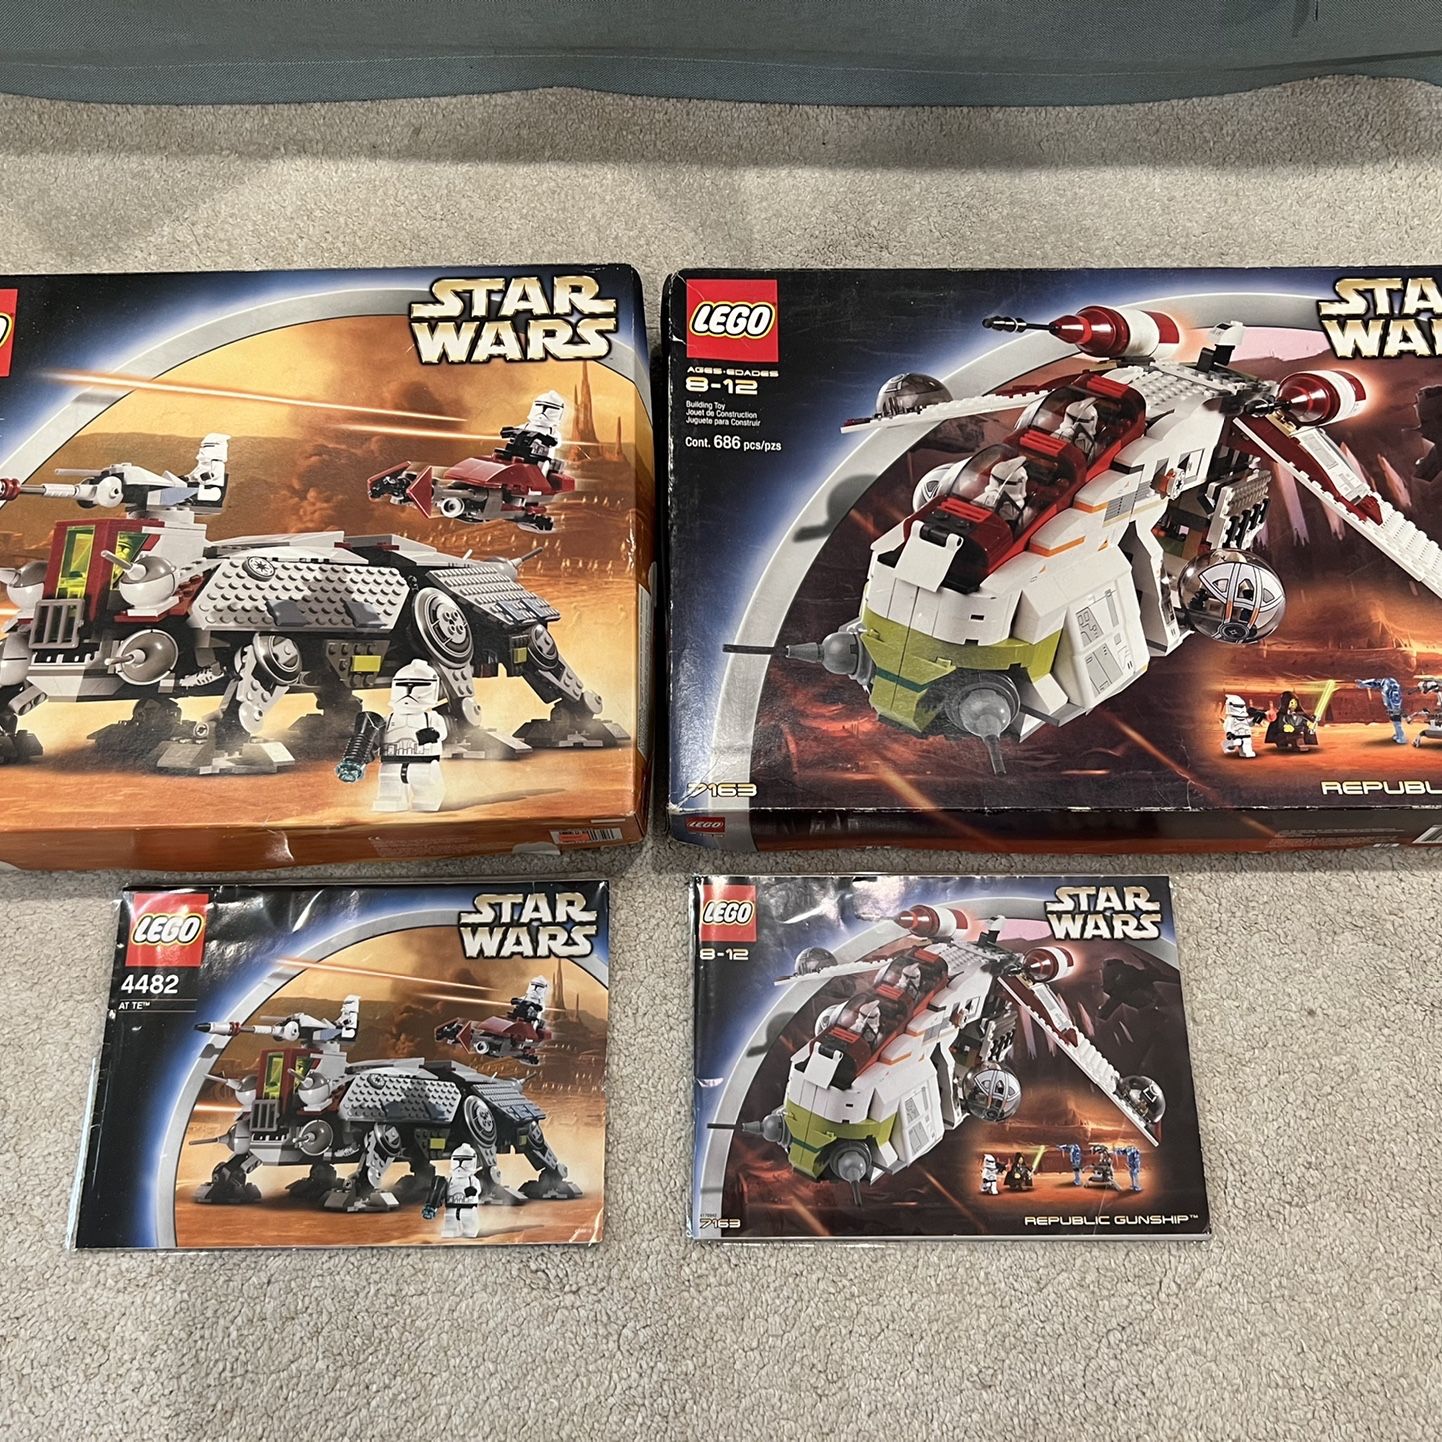 LEGO Star 7163 + 4482 Sale in West Hollywood, CA - OfferUp